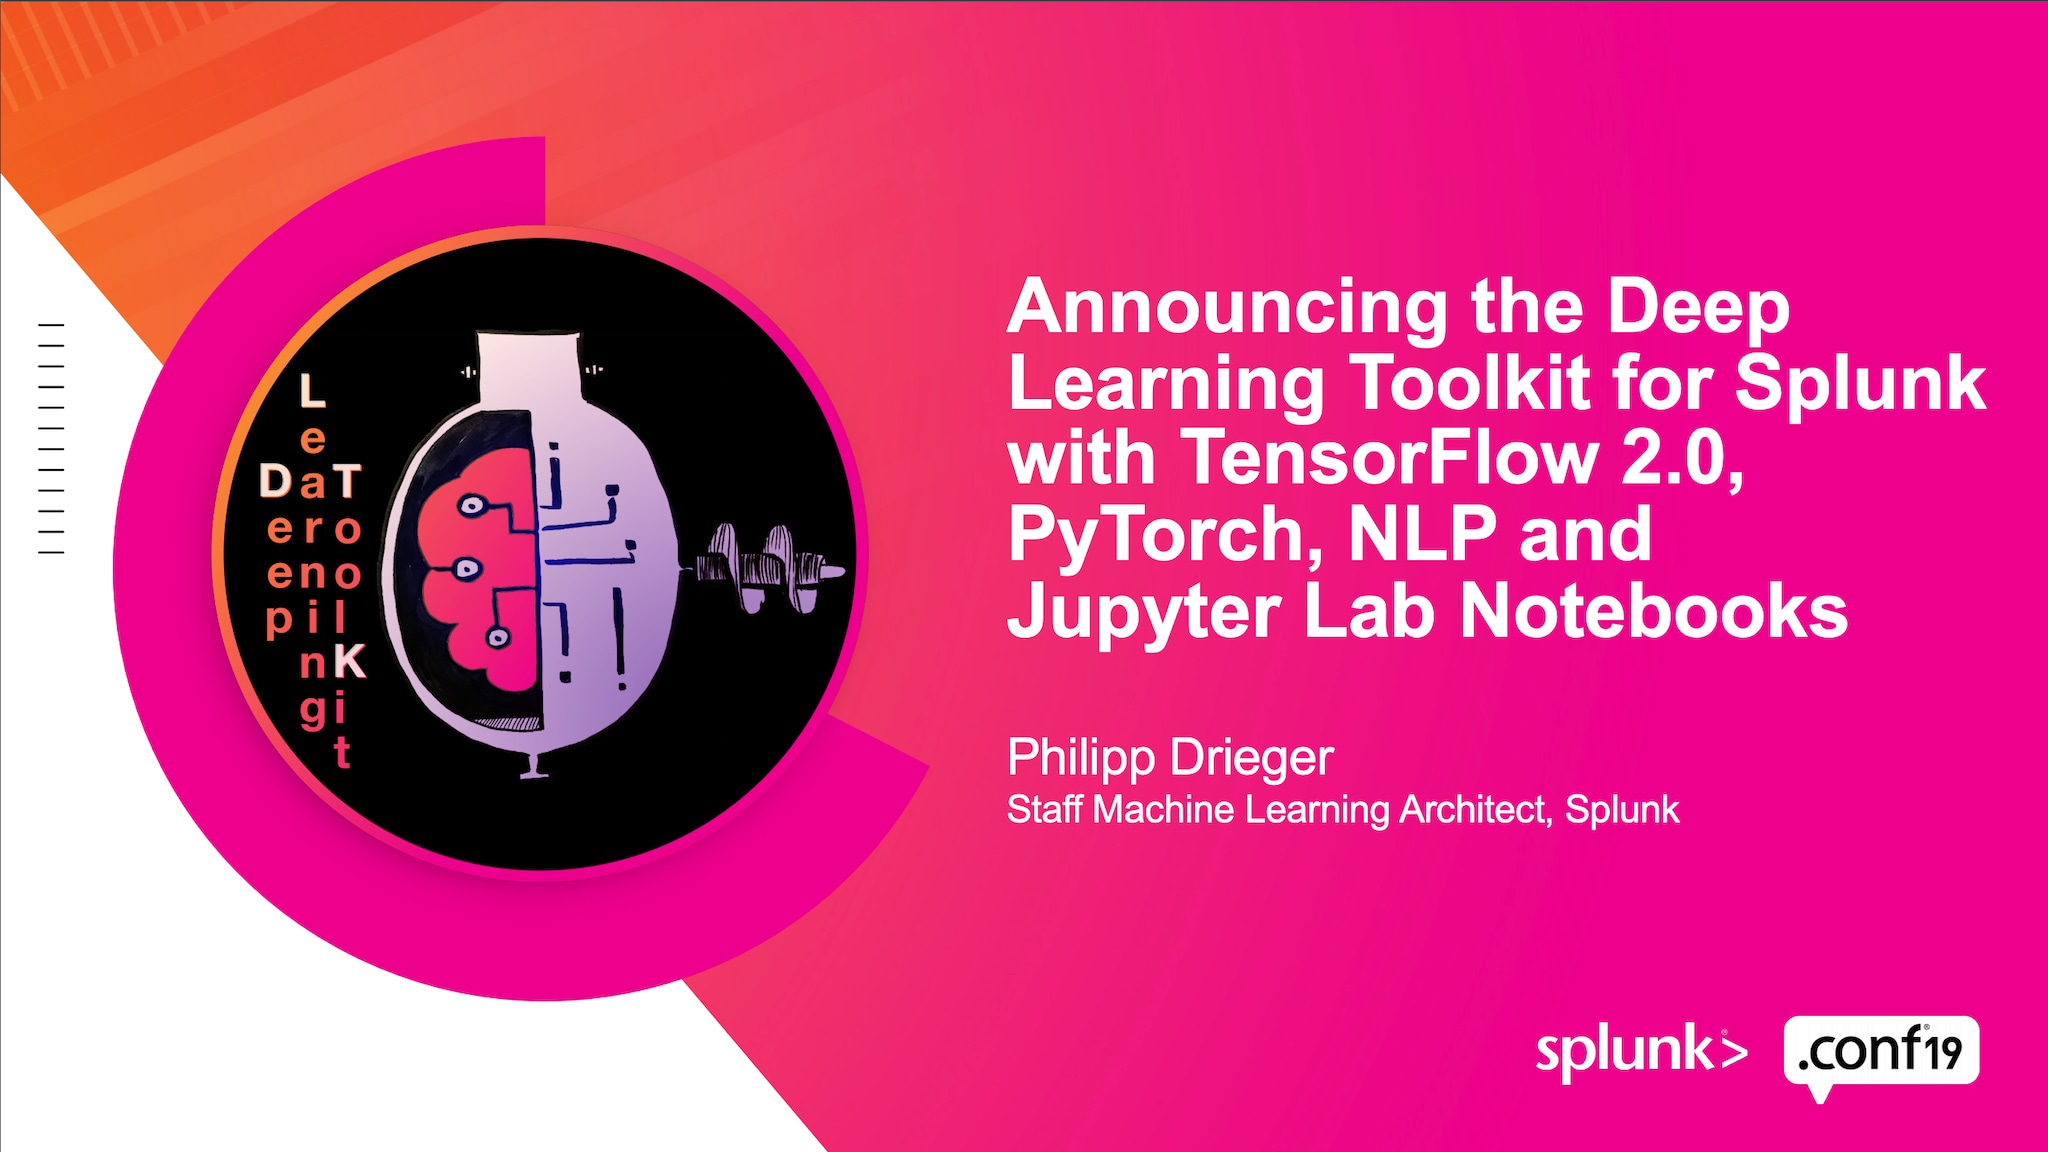 Announcing the Deep Learning Toolkit